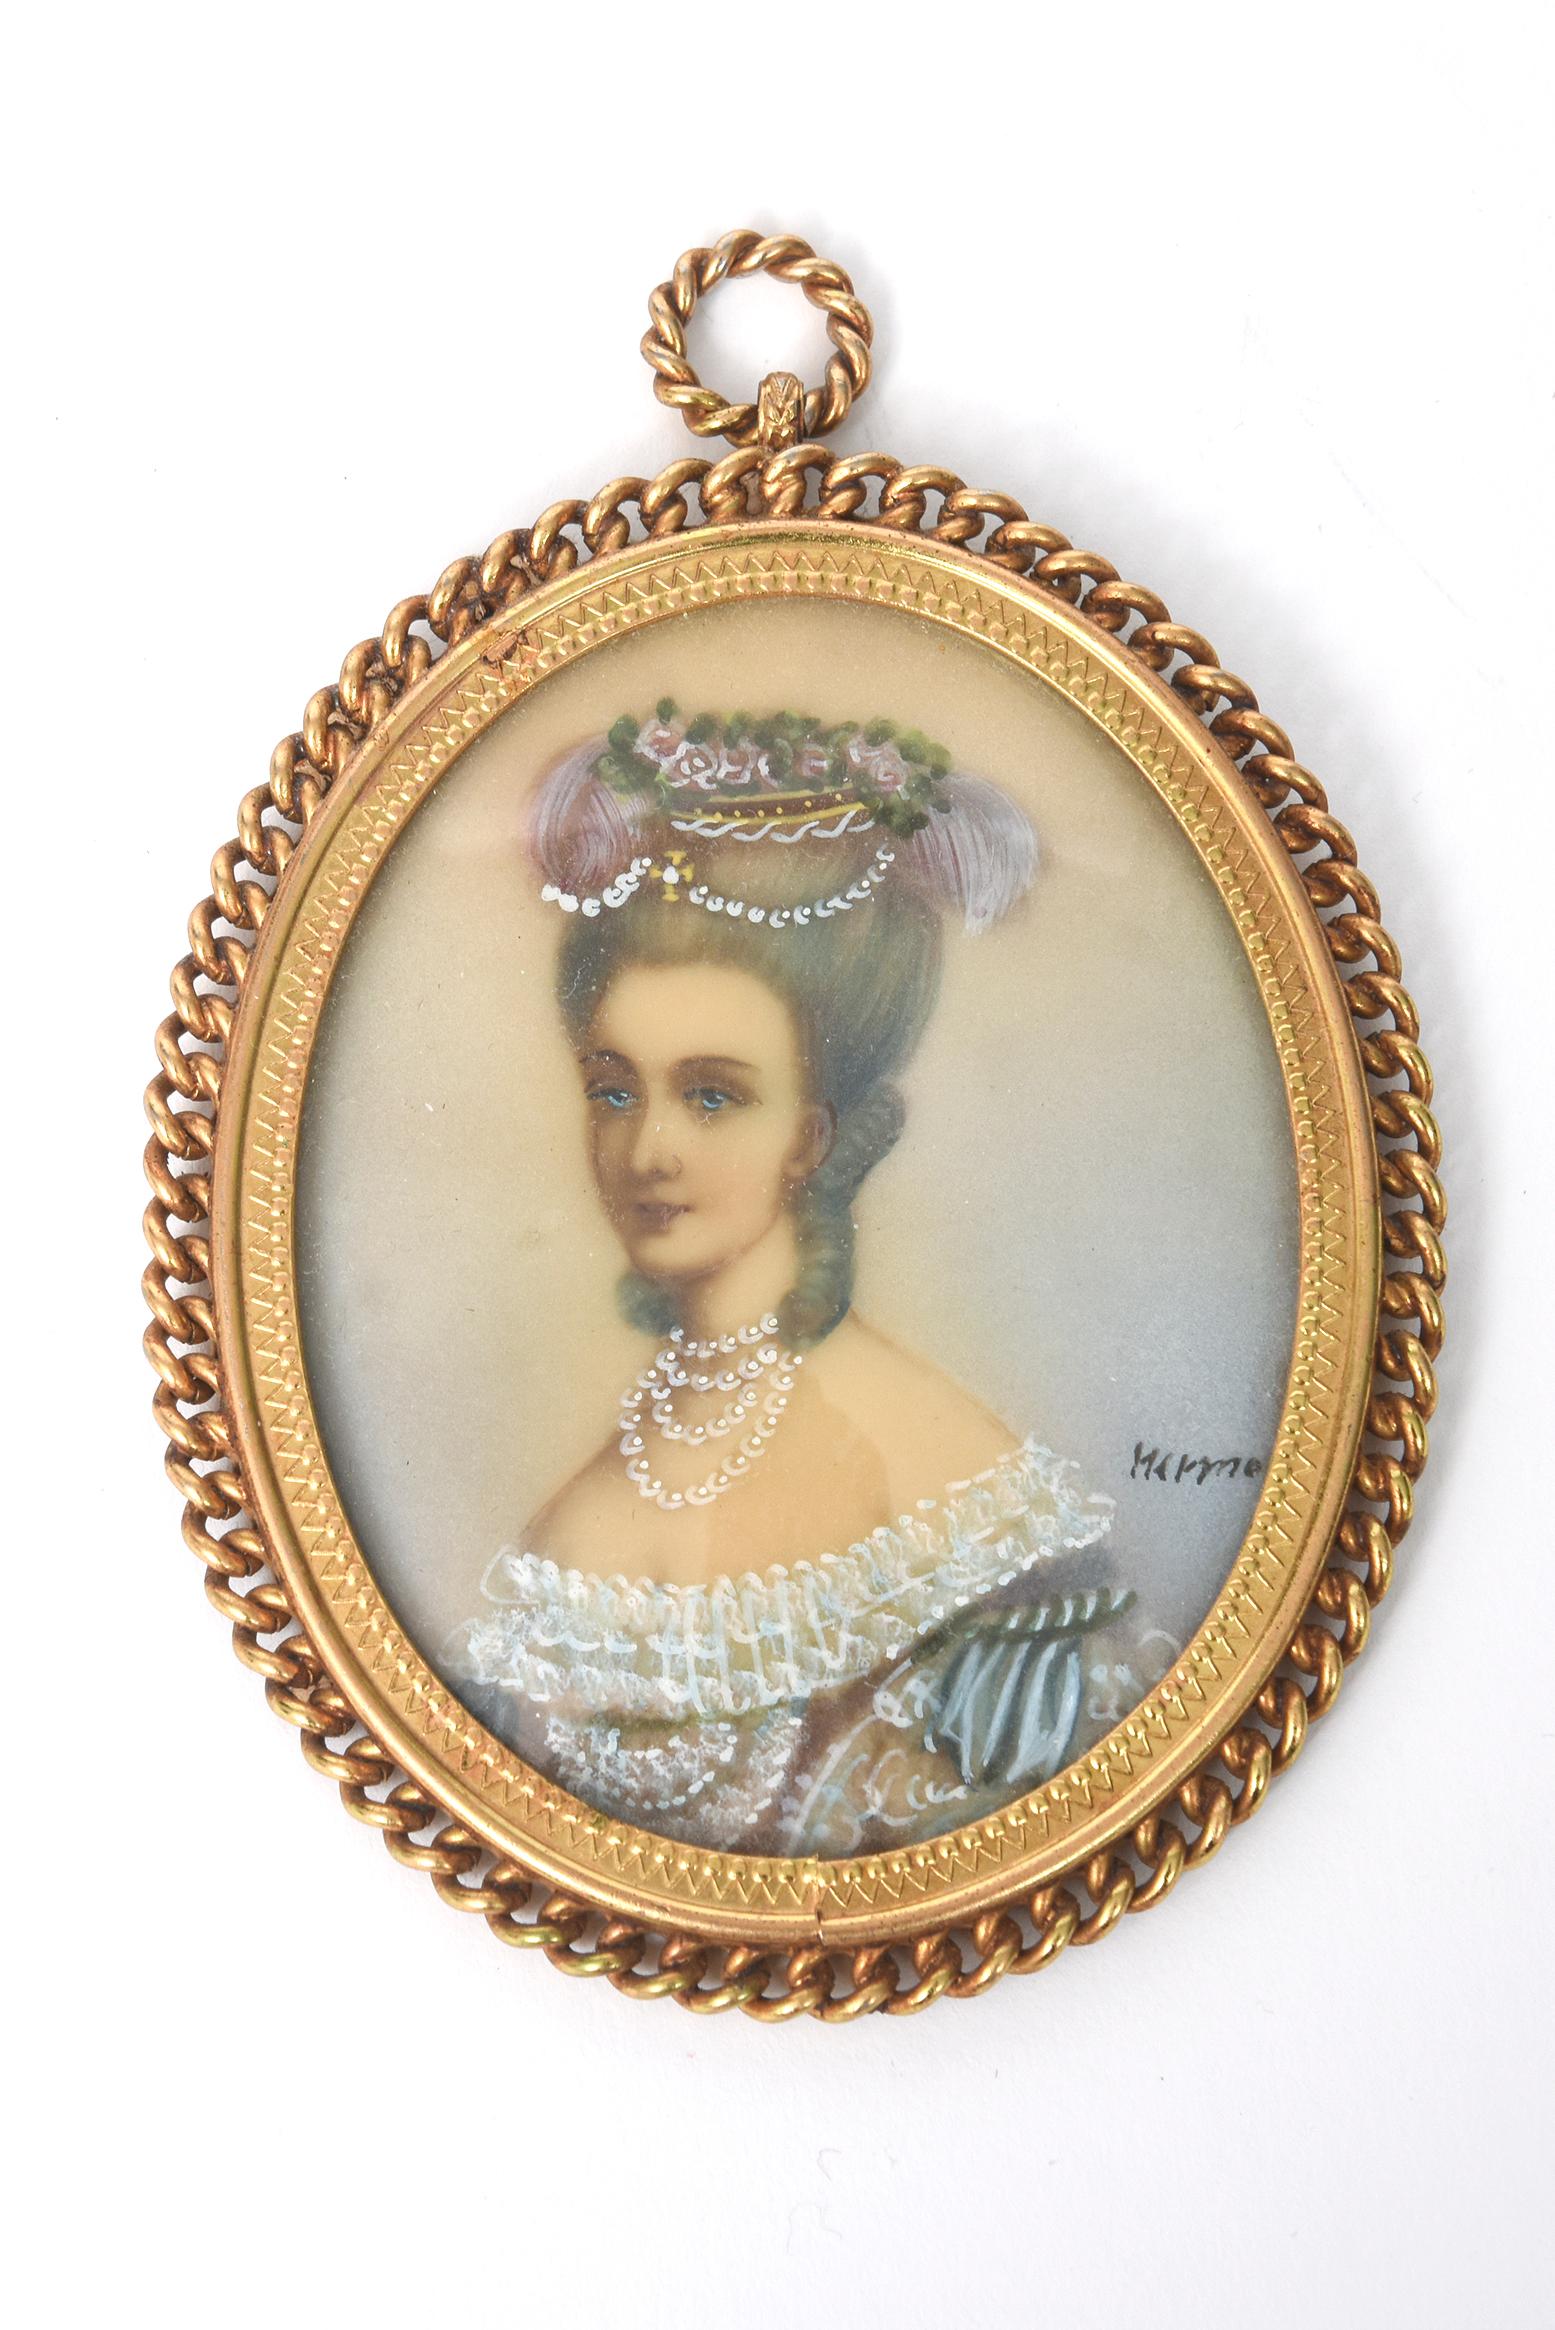 Antique Miniature Hand Painted Portrait Jeweled Nobel Woman Painting Gilt Frame For Sale 3